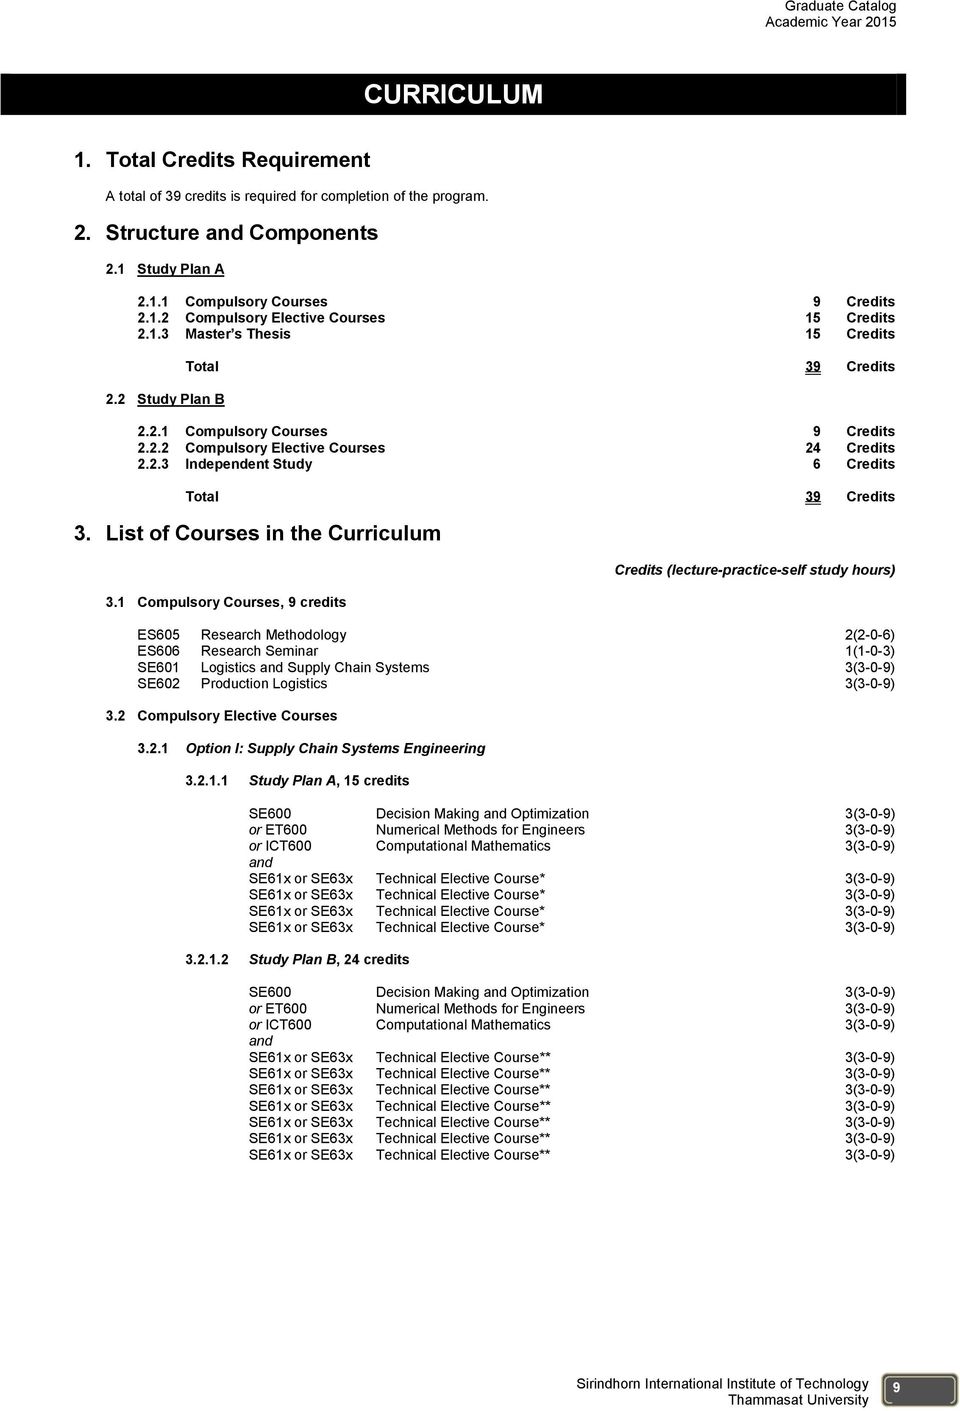 List of Courses in the Curriculum 3.